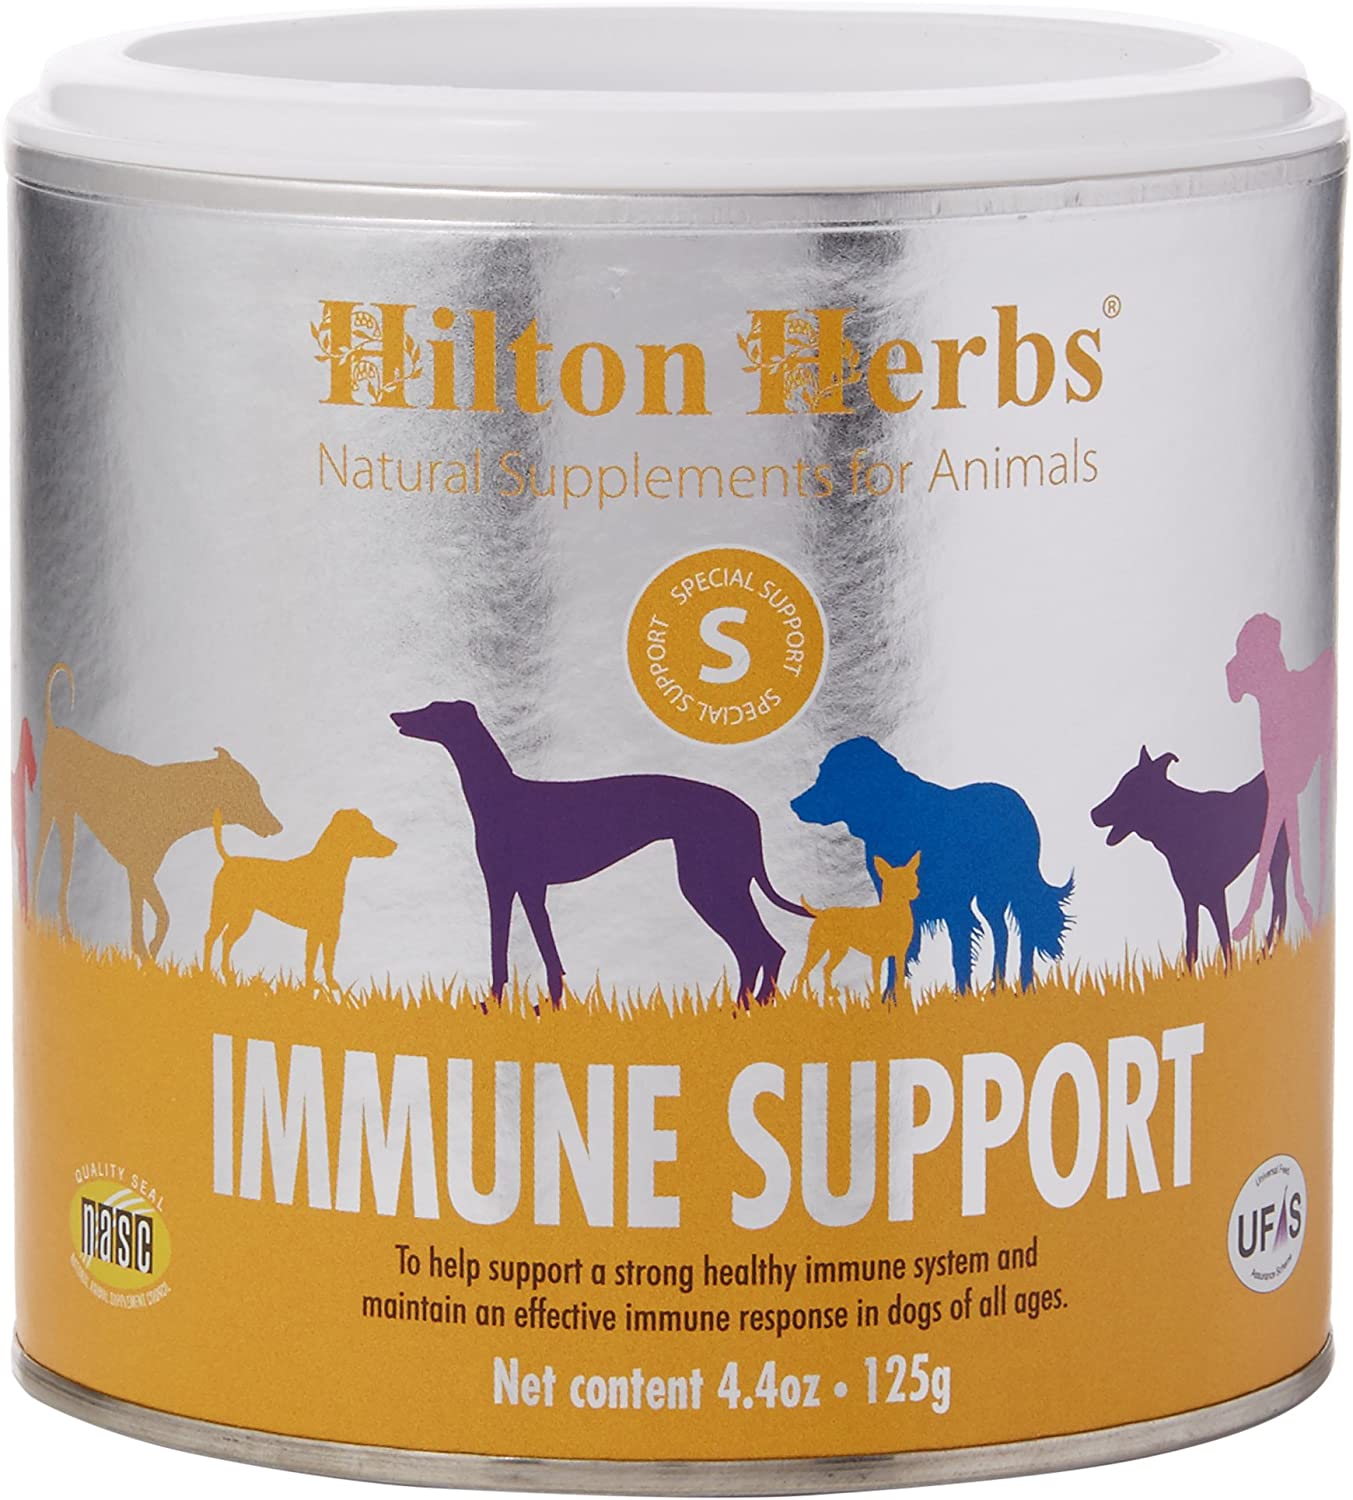 Hilton Herbs Canine Immune Support Herbal Immunity Function Support Supplement for Dogs, 4.4 oz Tub